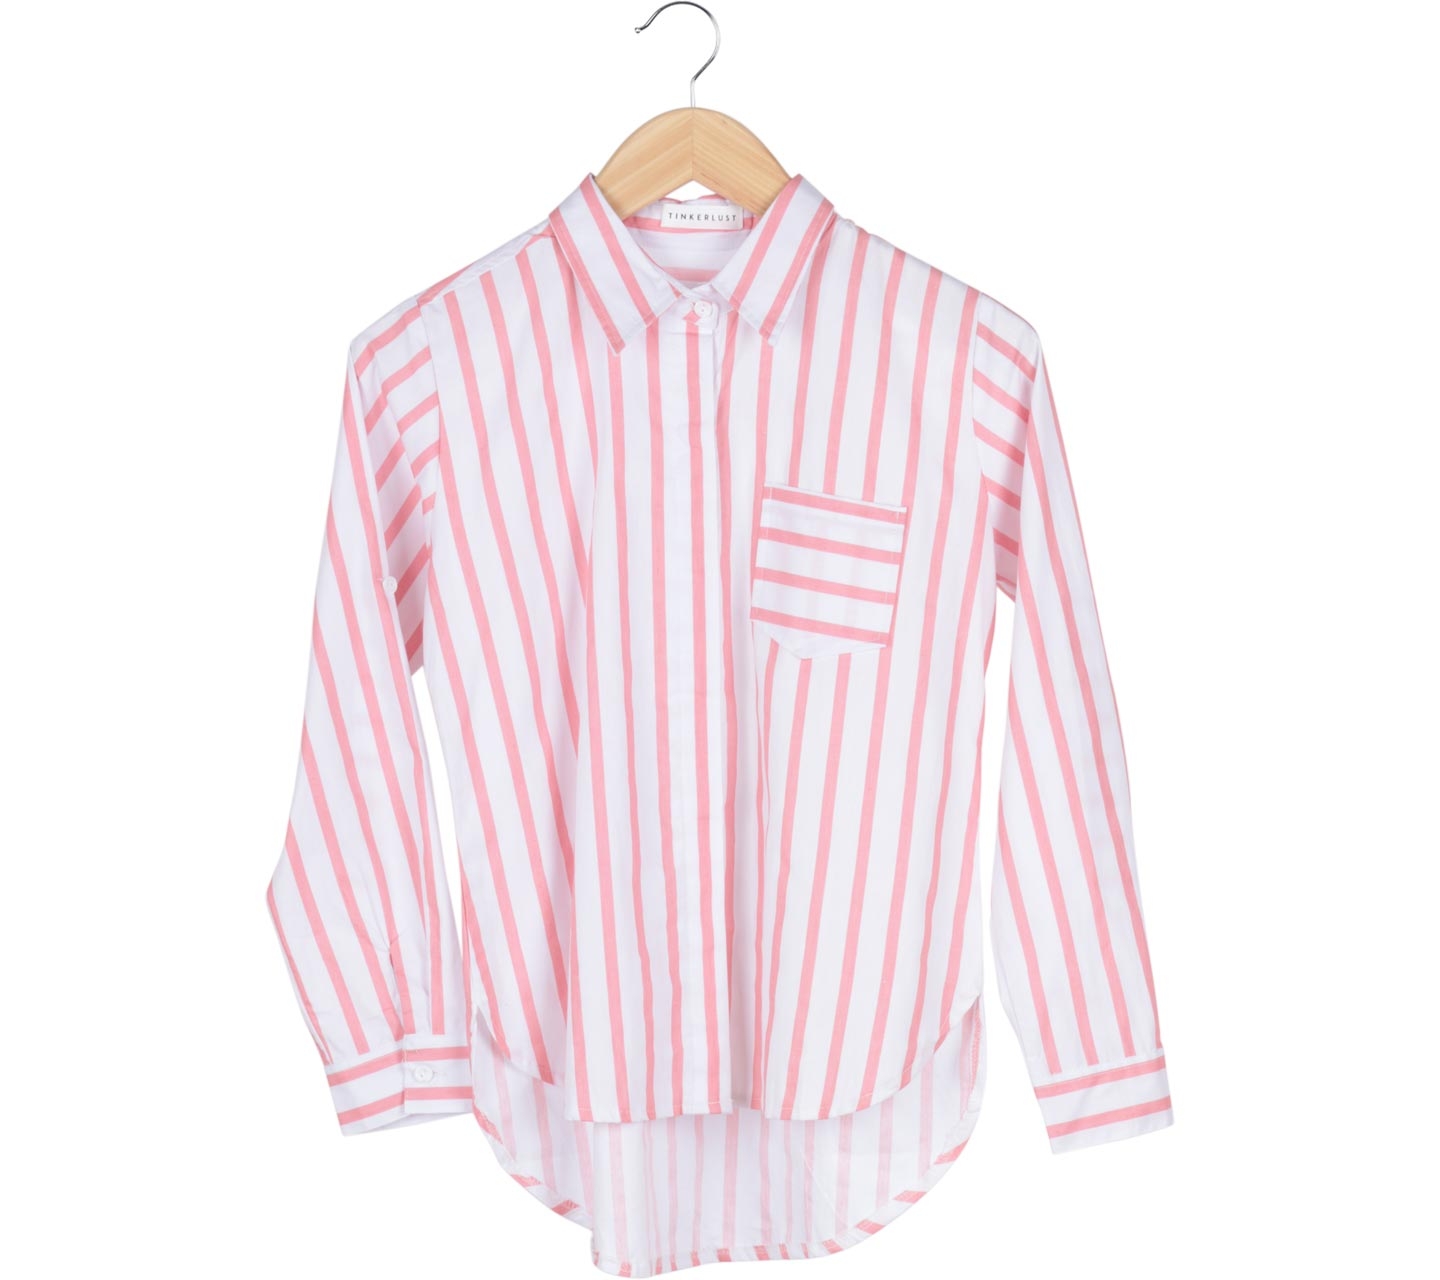 Tinkerlust White With Pink Stripes Shirt